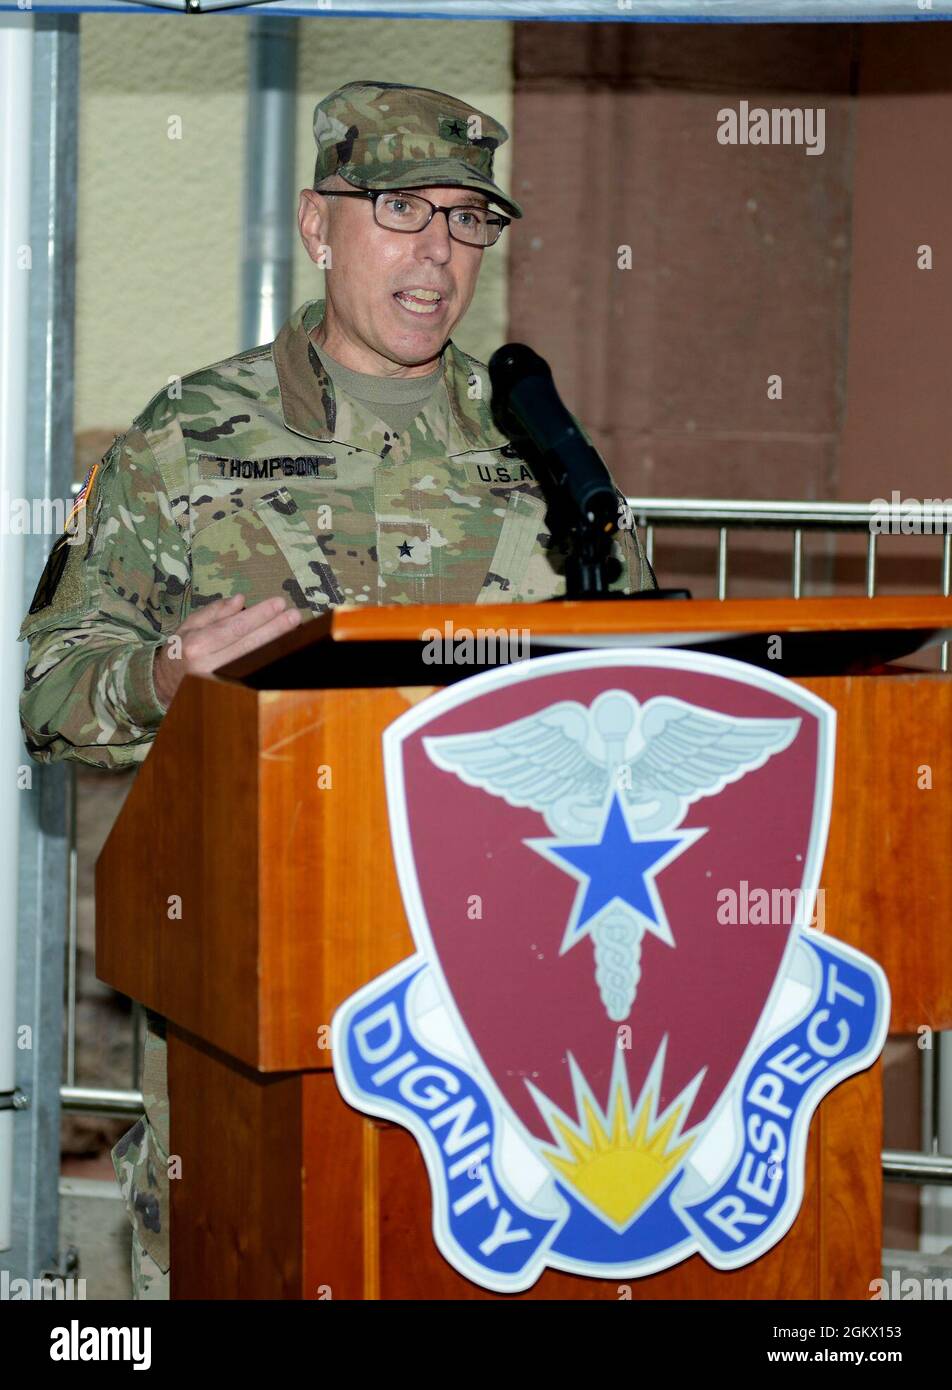 U.S. Army Brig. Gen. Mark Thompson, commanding general of Regional Health Command Europe and command surgeon for U.S. Army Europe and Africa, provides remarks at the ribbon cutting ceremony for the new Specialty Dental Clinic at Landstuhl, Germany July 14, 2021. The new dental facility will provide general dentistry, periodontics, endodontics, prosthodontics, orthodontics, and pedodontics. Stock Photo